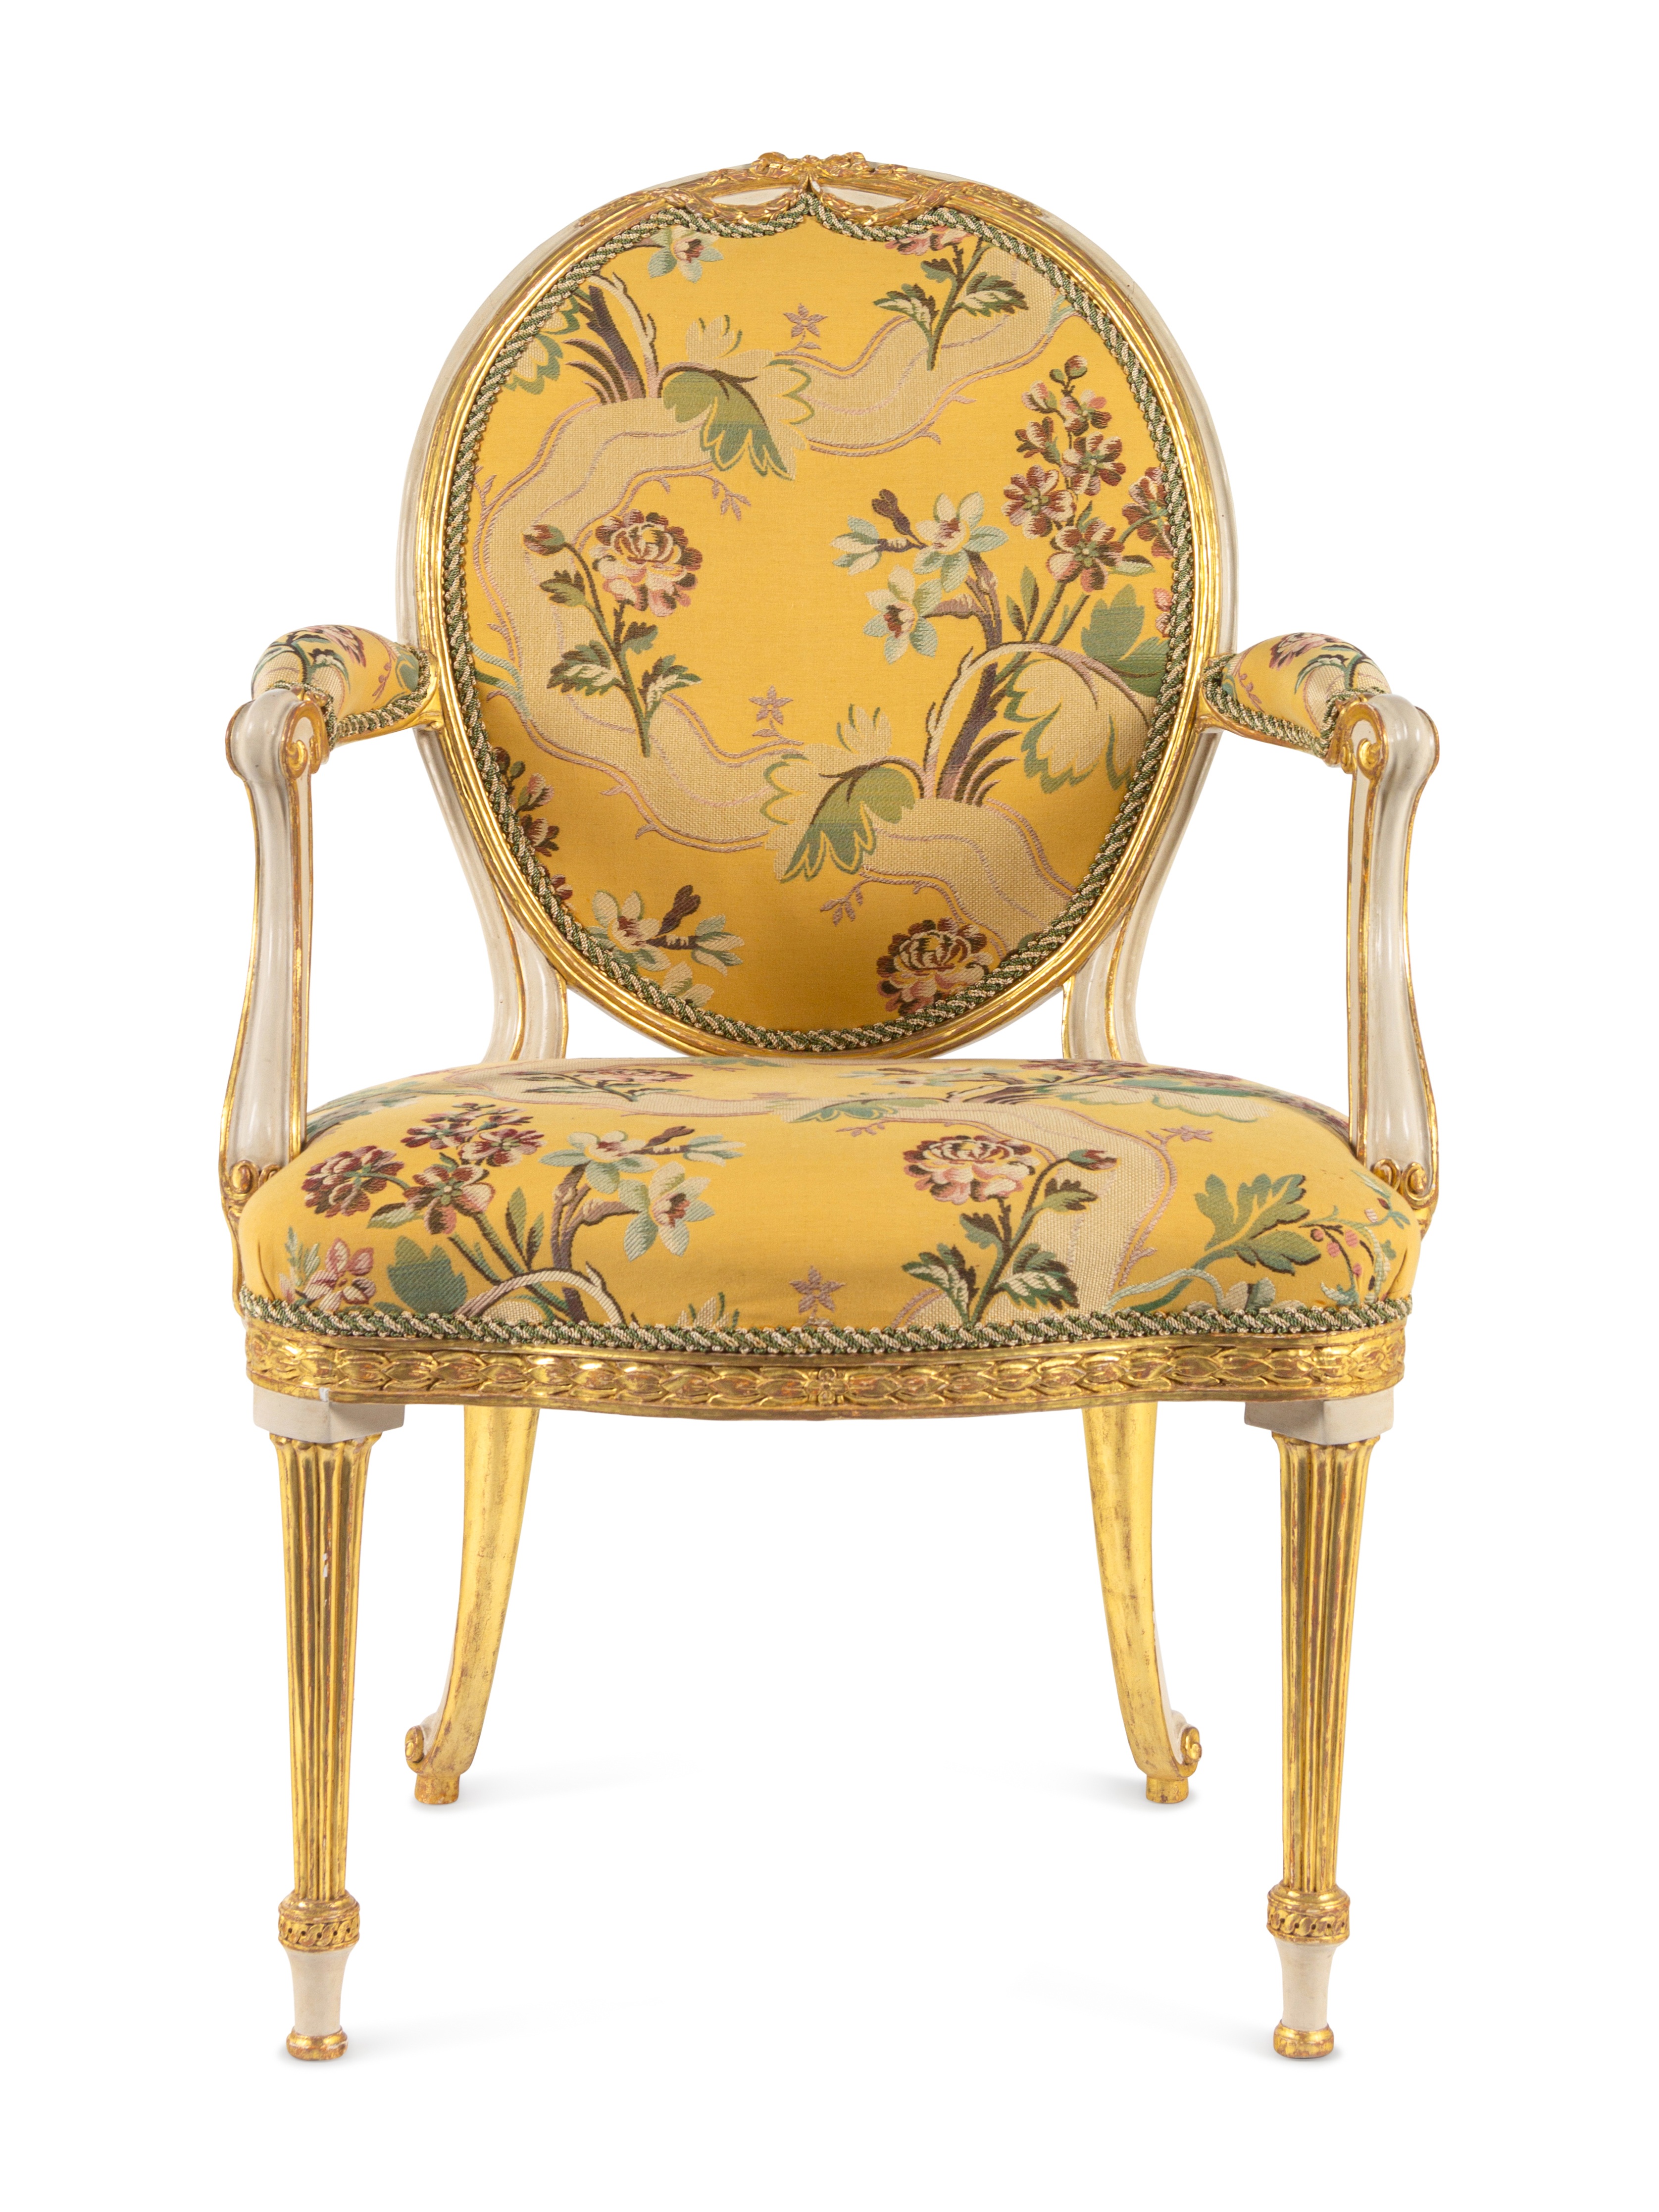 A George III White-Painted and Parcel-Gilt Open Armchair